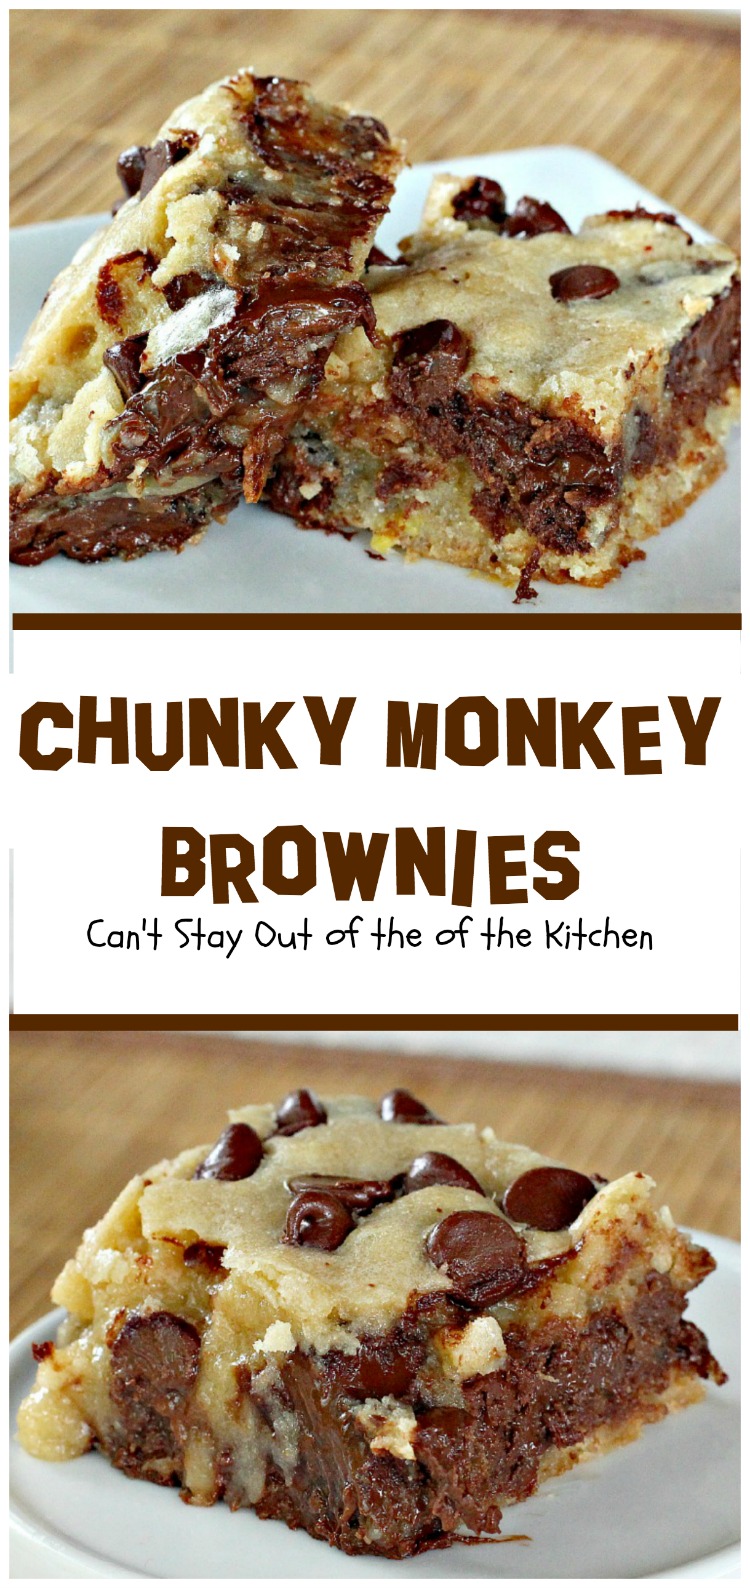 Chunky Monkey Brownies | Can't Stay Out of the Kitchen | these ooey, gooey #brownies are filled with #chocolate baking melts, #chocolatechips and #bananas. They are beyond amazing. #dessert #cookie